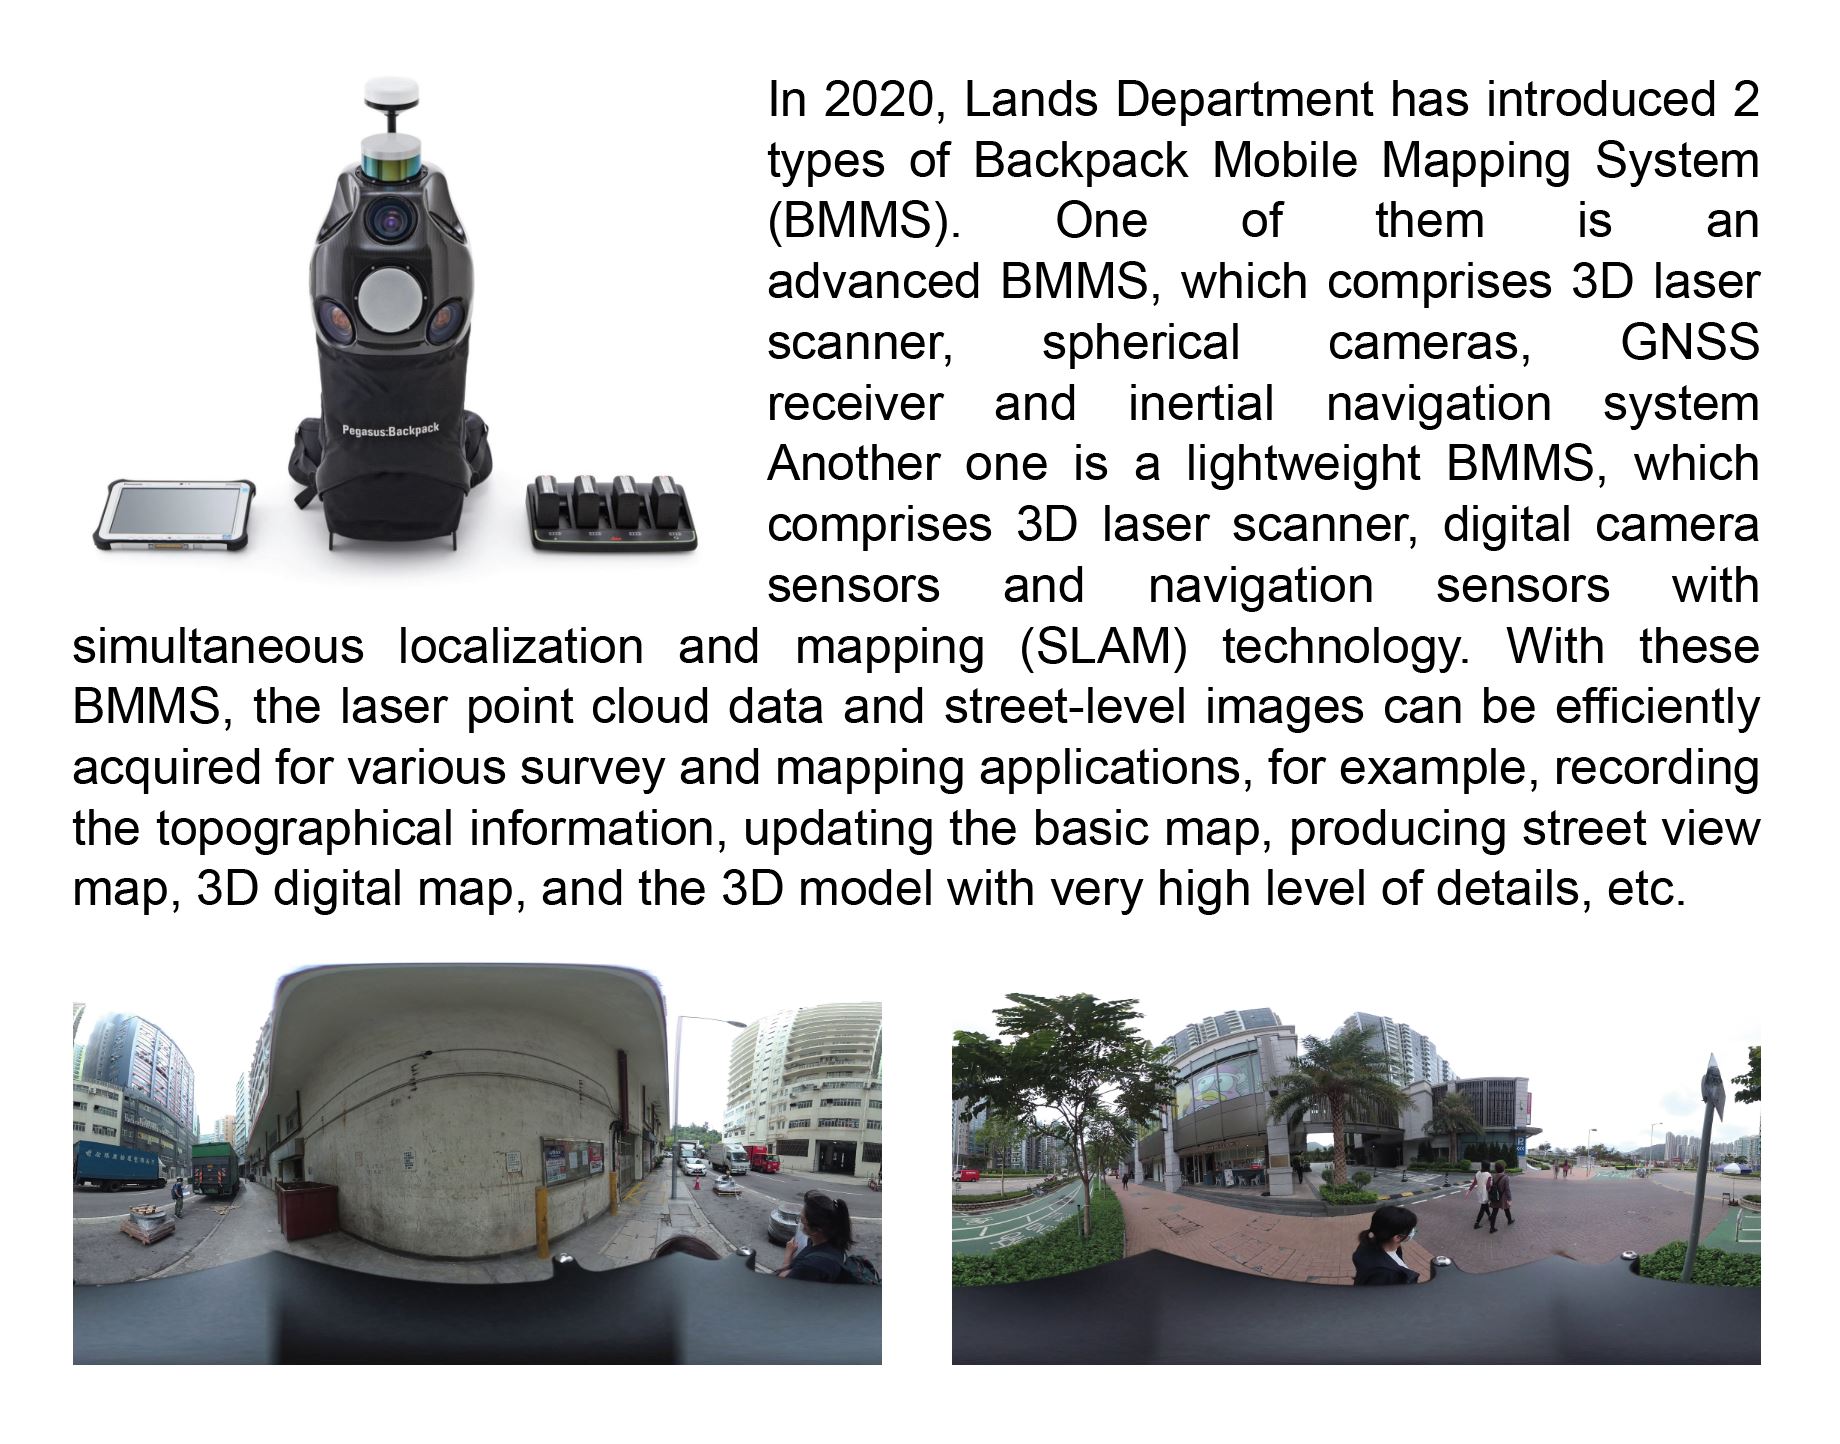 In 2020, Lands Department has introduced 2 types of Backpack Mobile Mapping System (BMMS). One of them is an advanced BMMS, which comprises 3D laser scanner, spherical cameras, GNSS receiver and inertial navigation system. Another one is a lightweight BMMS, which comprises 3D laser scanner, digital camera sensors and navigation sensors with simultaneous localization and mapping (SLAM) technology. With these BMMS, the laser point cloud data and street-level images can be efficiently acquired for various survey and mapping applications, for example, recording the topographical information, updating the basic map, producing street view map, 3D digital map, and the 3D model with very high level of details, etc.